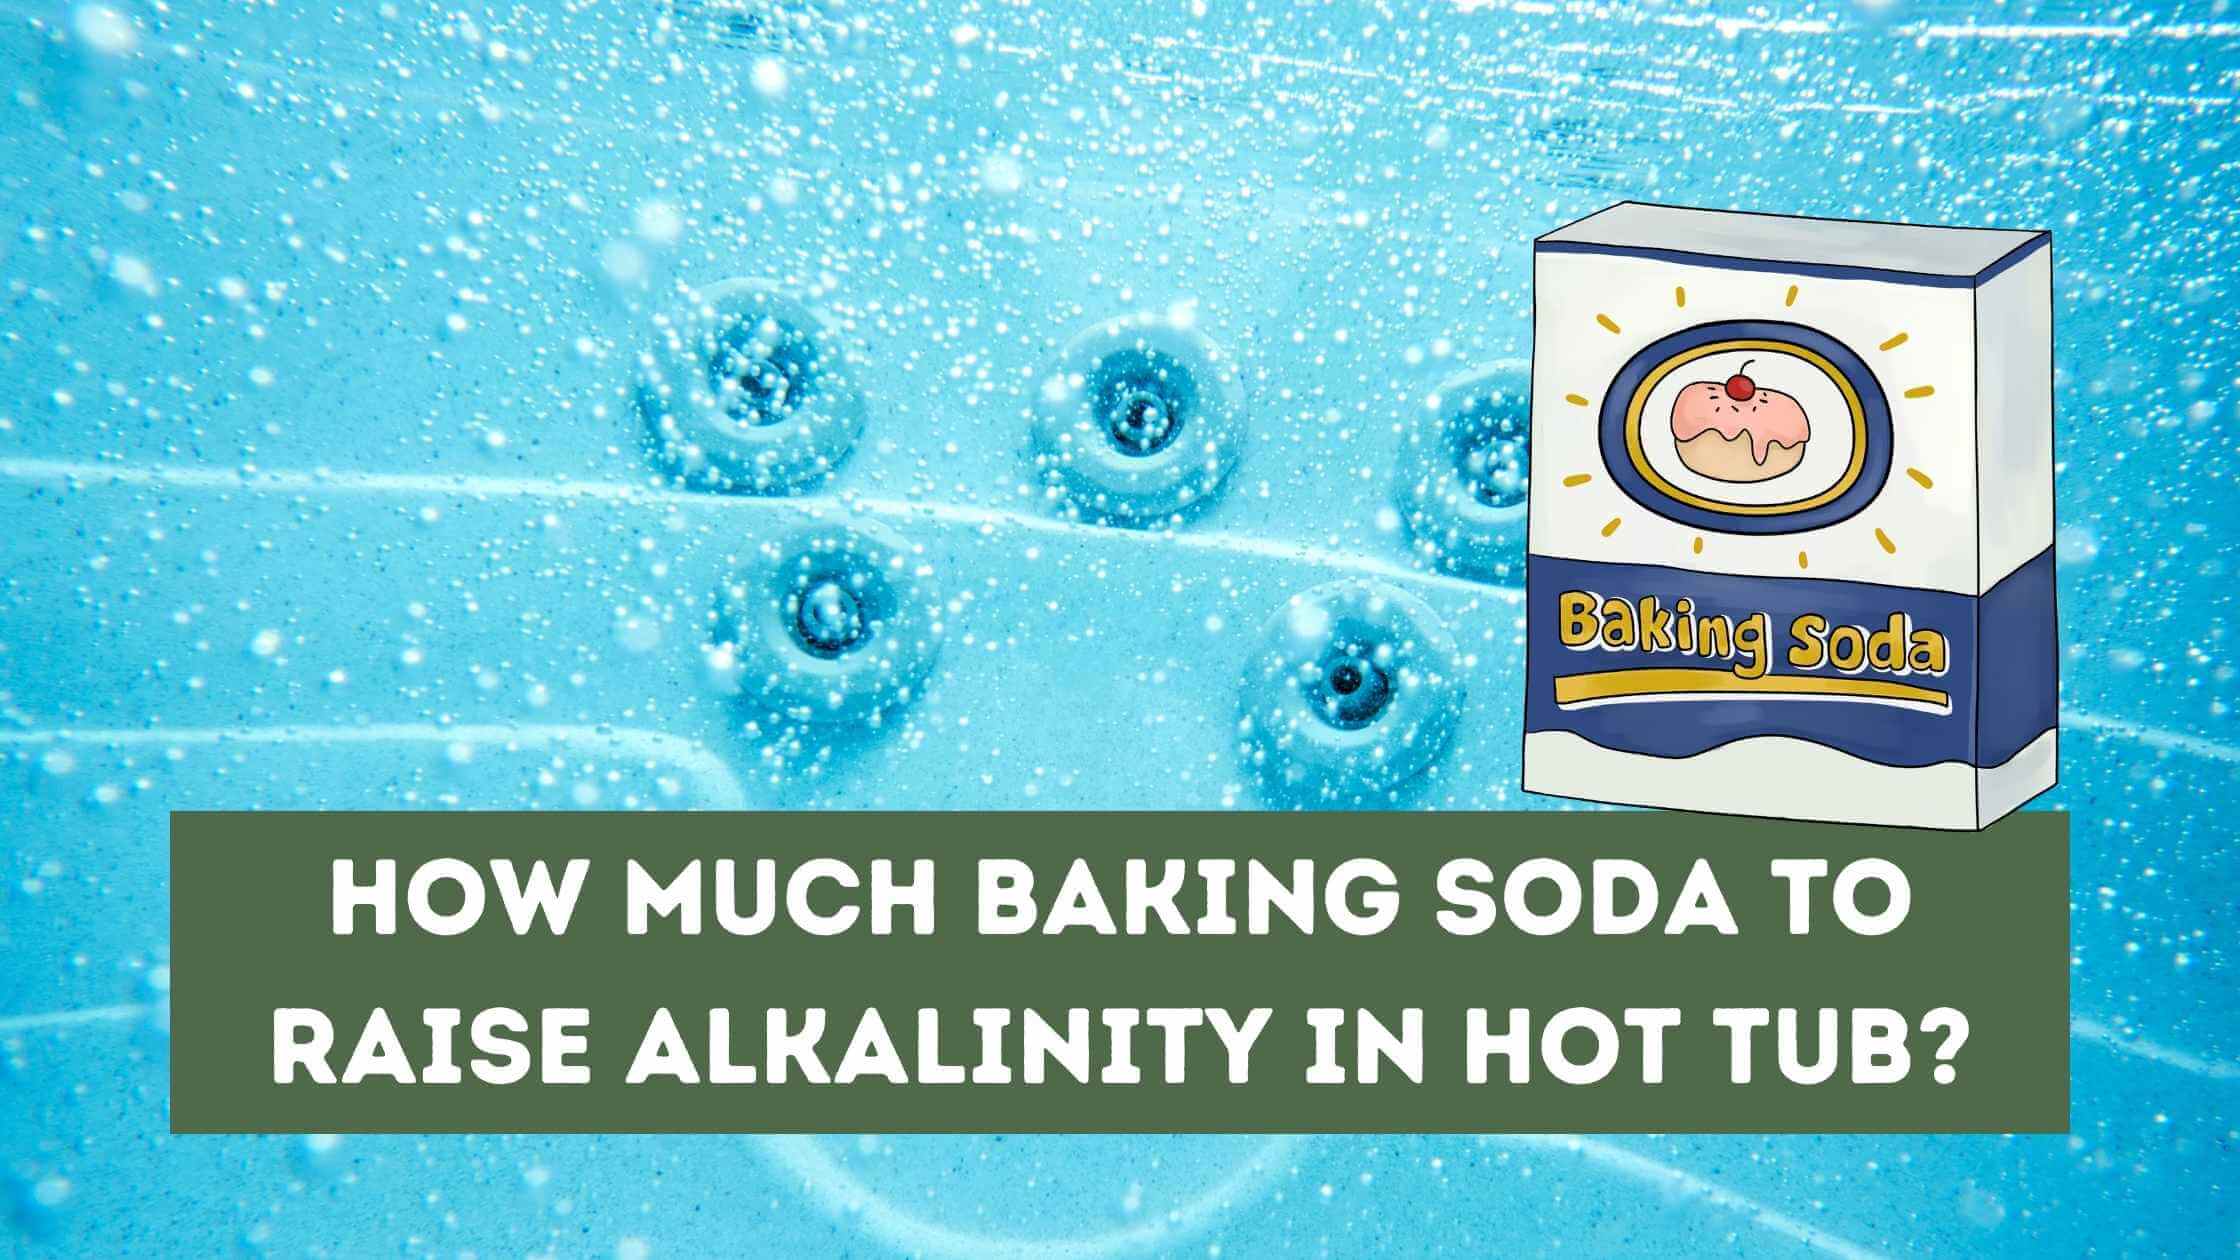 How Much Baking Soda to Raise Alkalinity in Hot Tub